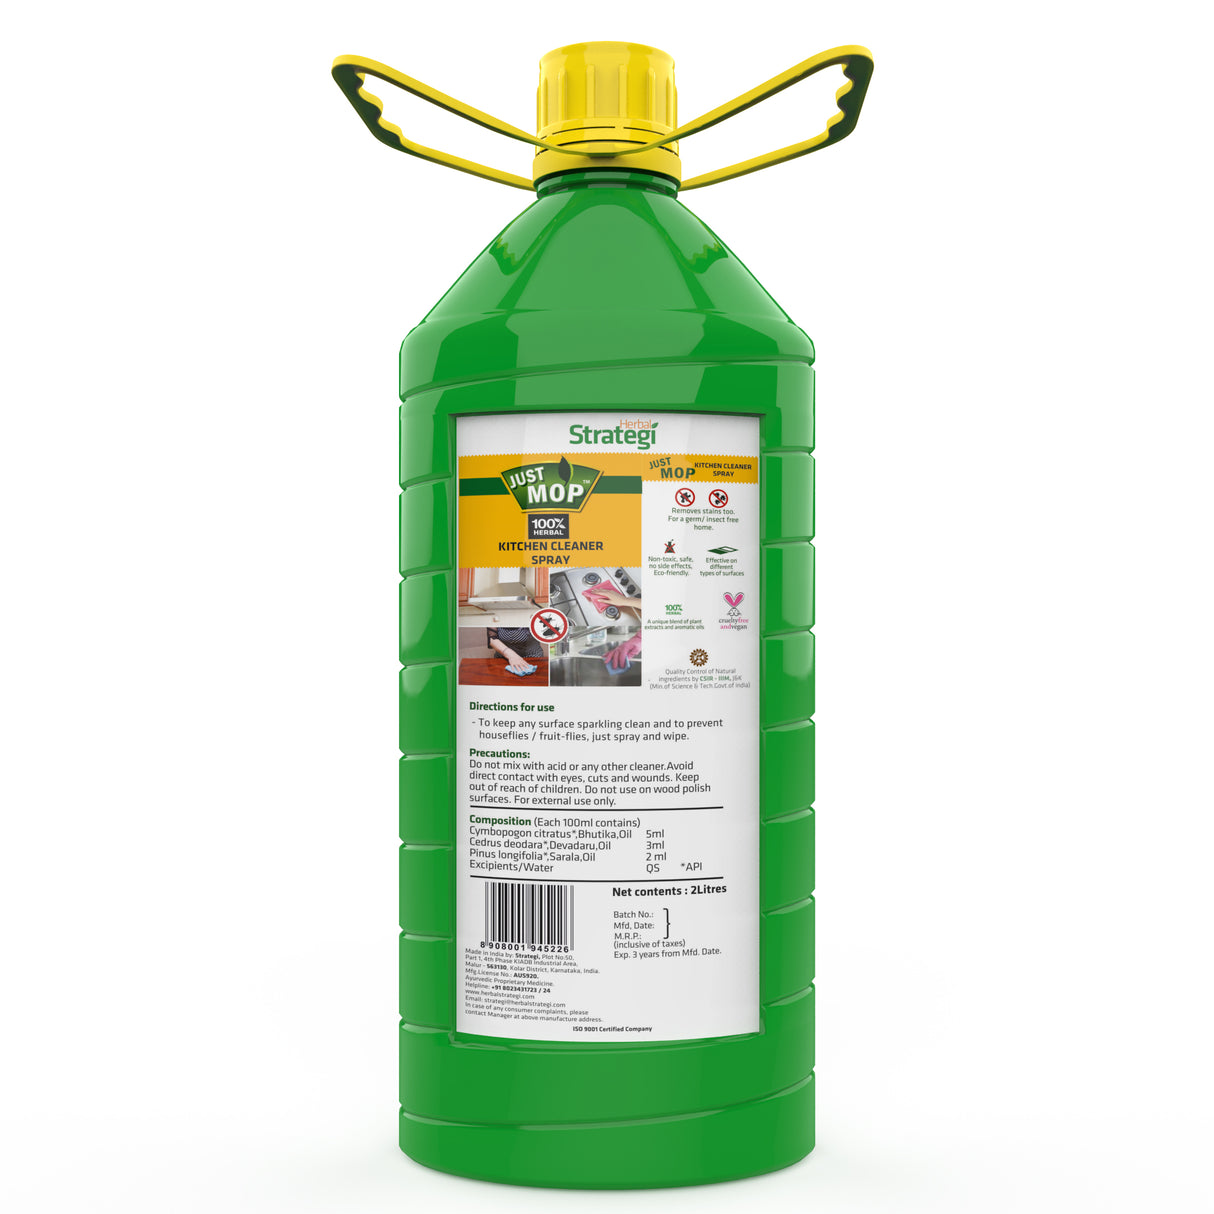 Herbal Kitchen cleaner, Disinfectant & Insect Repellent - Herbal Strategi